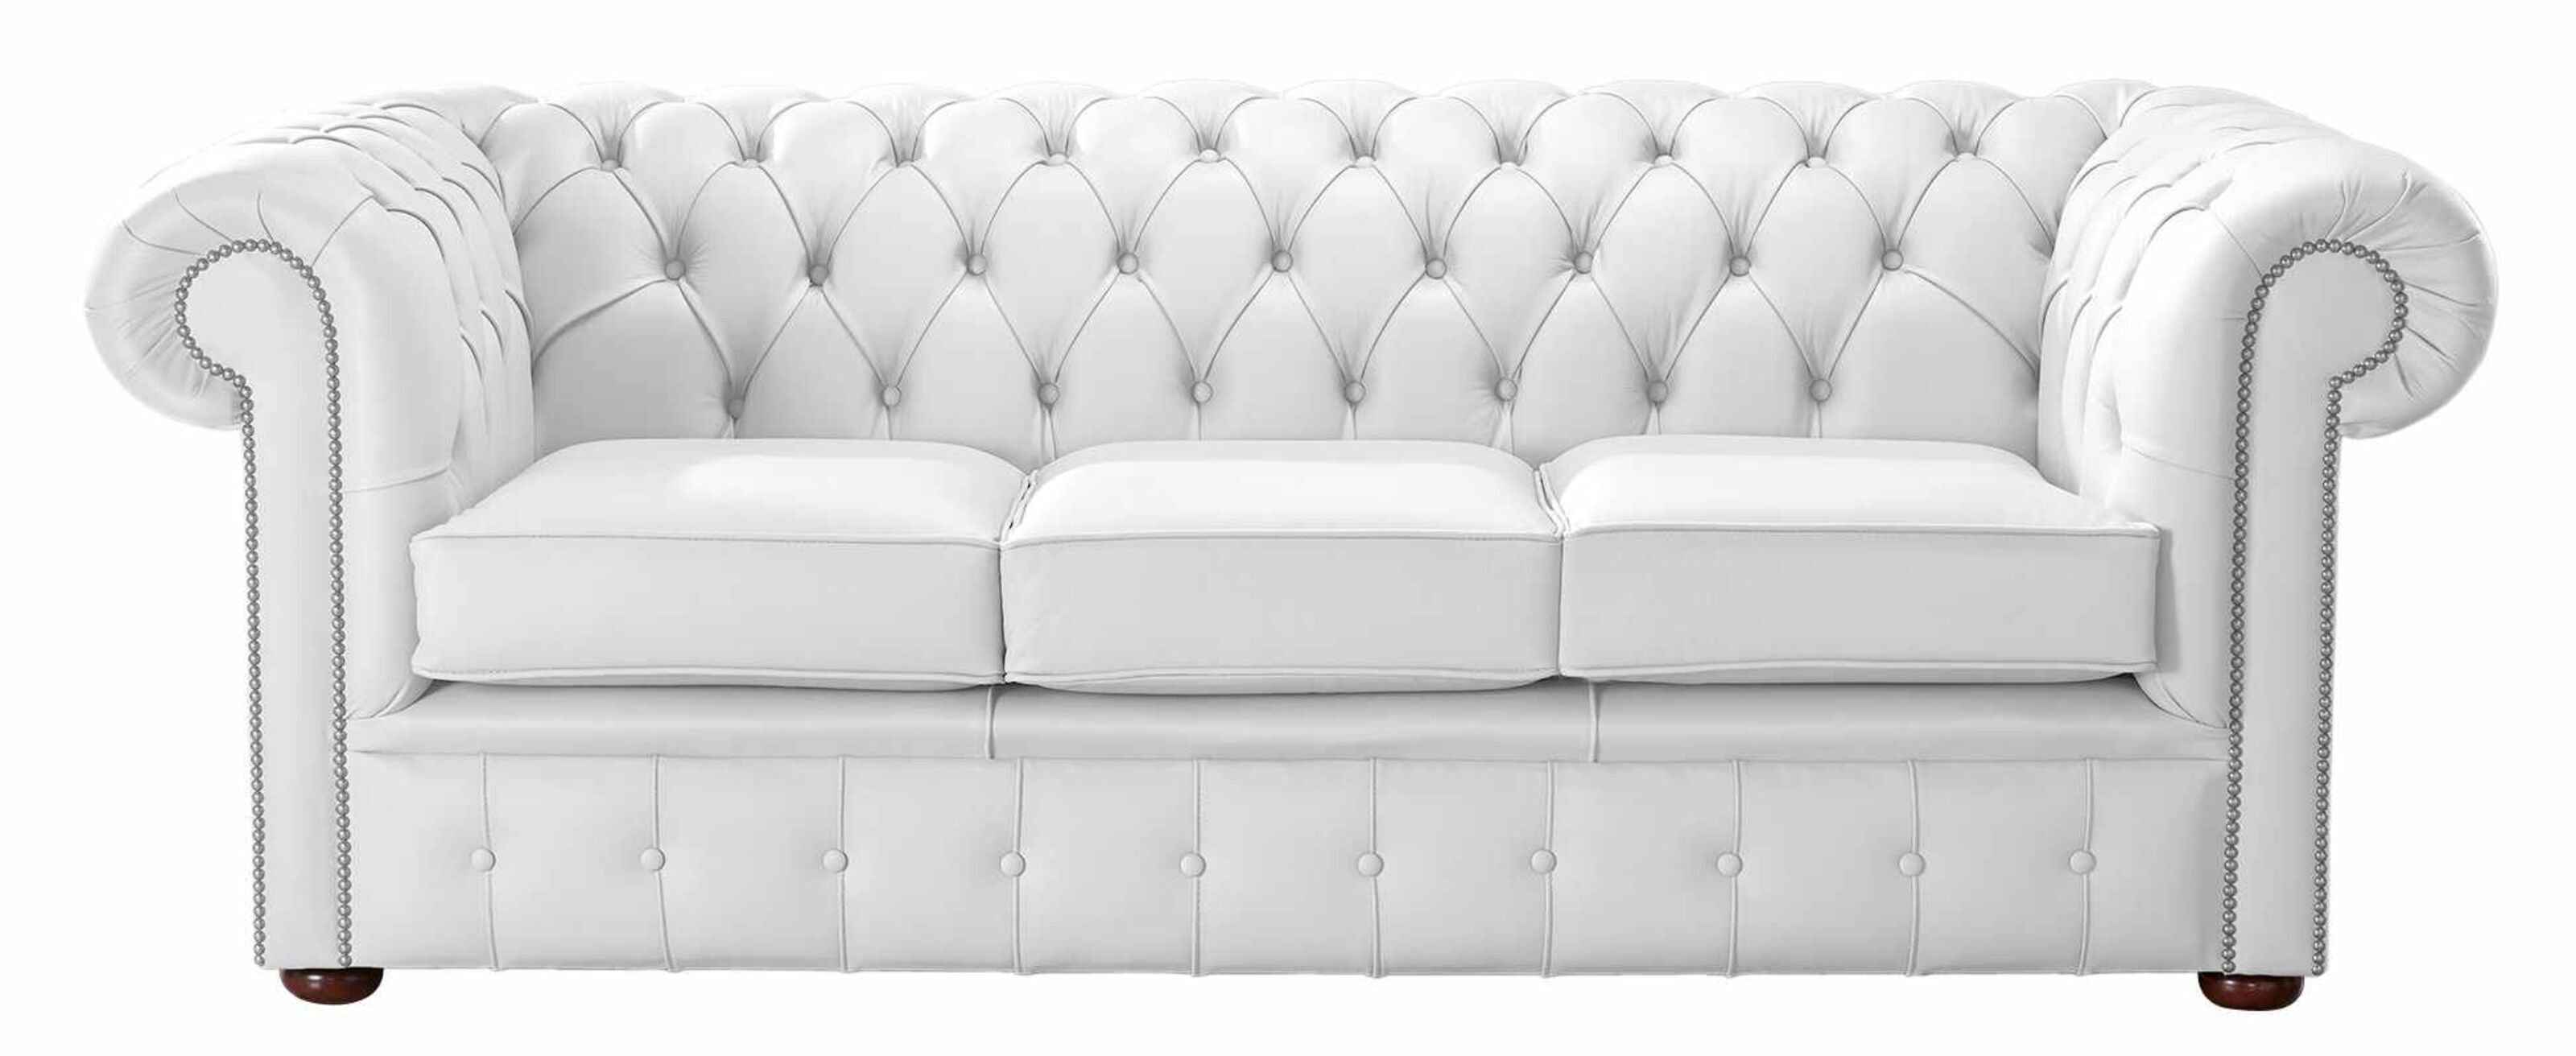 Exploring Chesterfield Sofas Options and Offerings  %Post Title